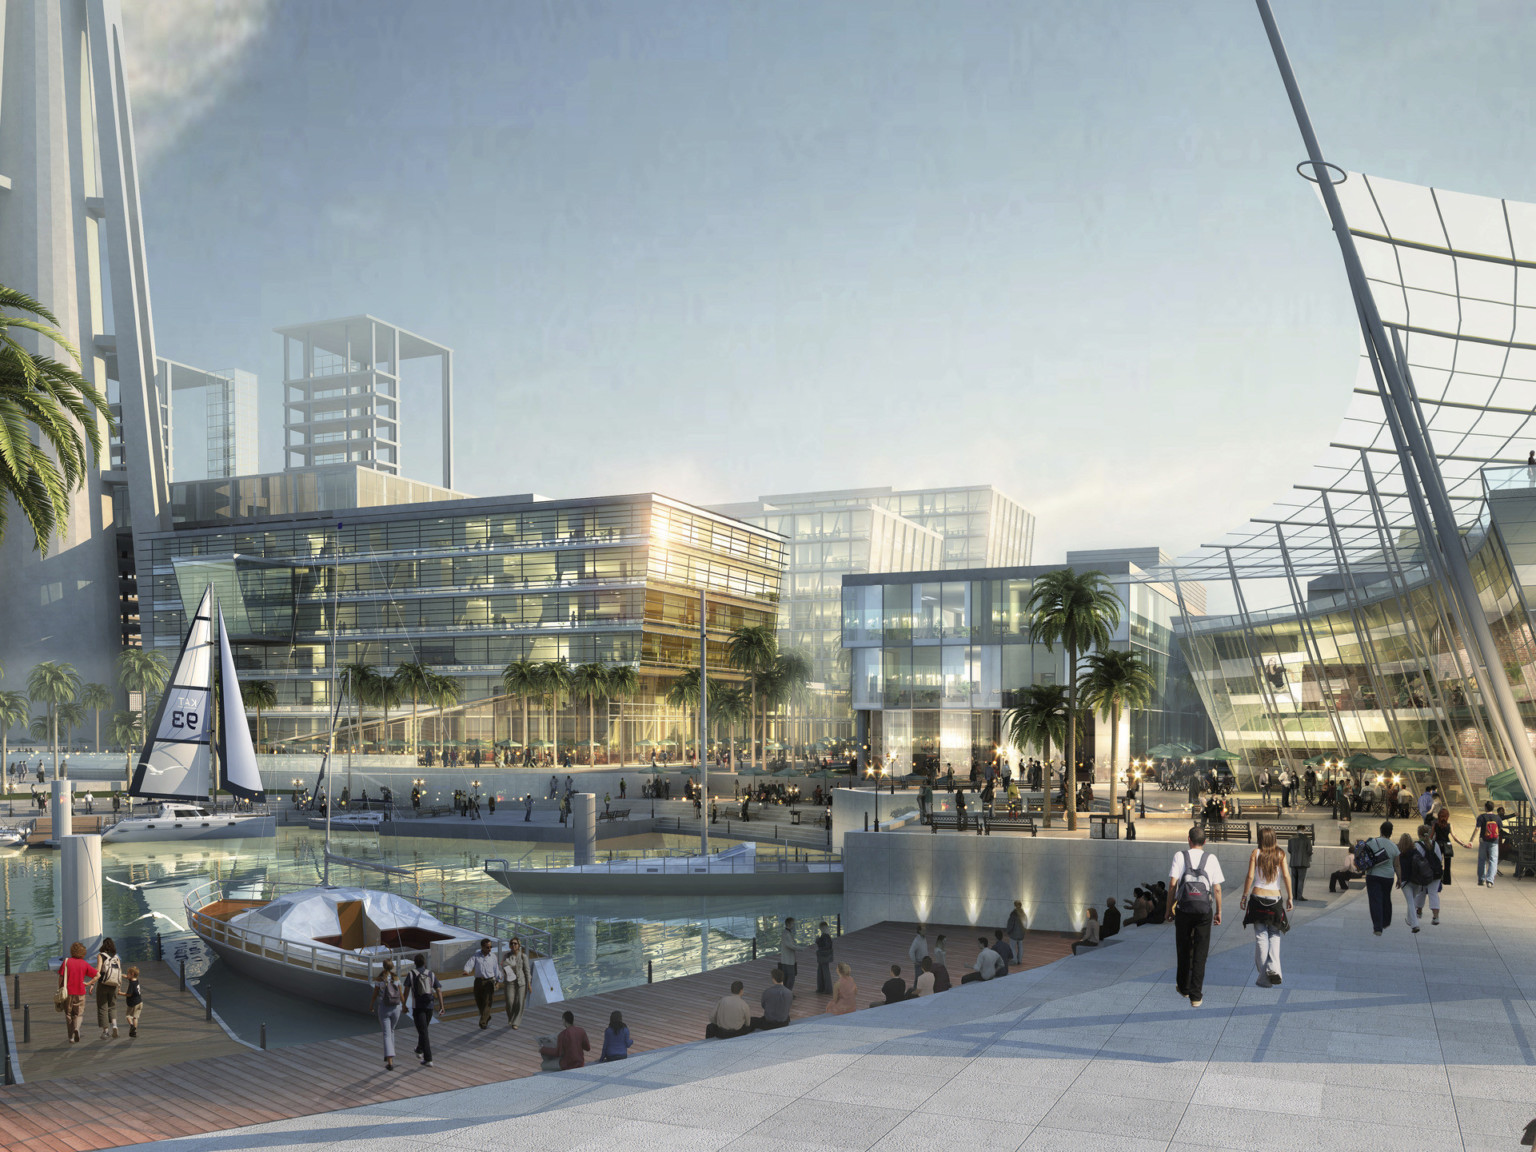 design concept of mixed-use buildings with glass facades surrounding central pedestrian walkway and dock with boats on water